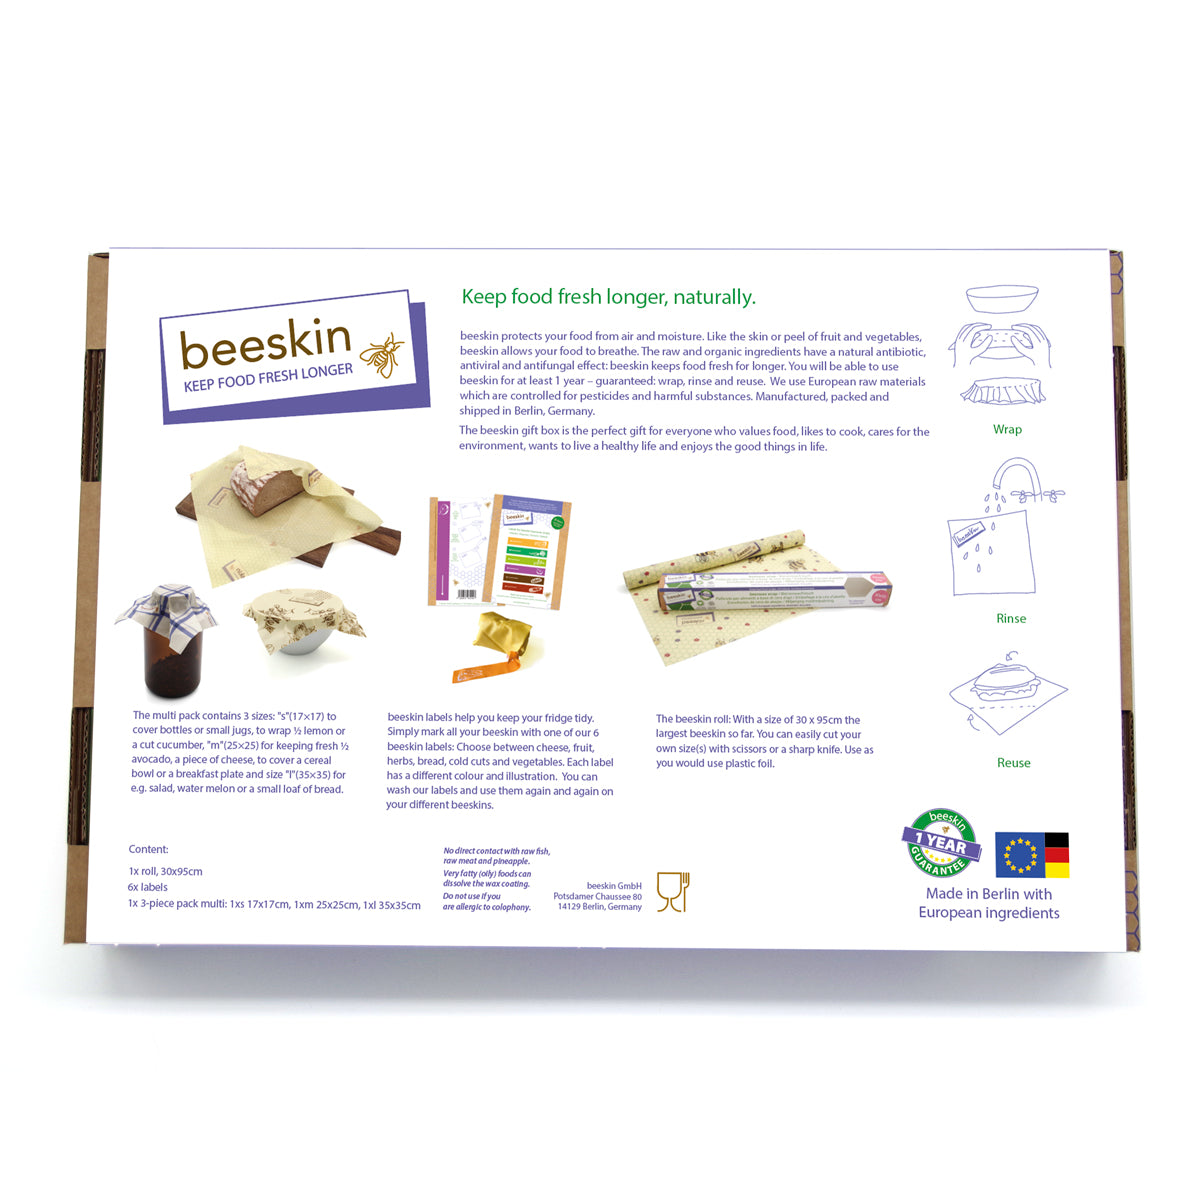 back beeskin packaging with detailed information